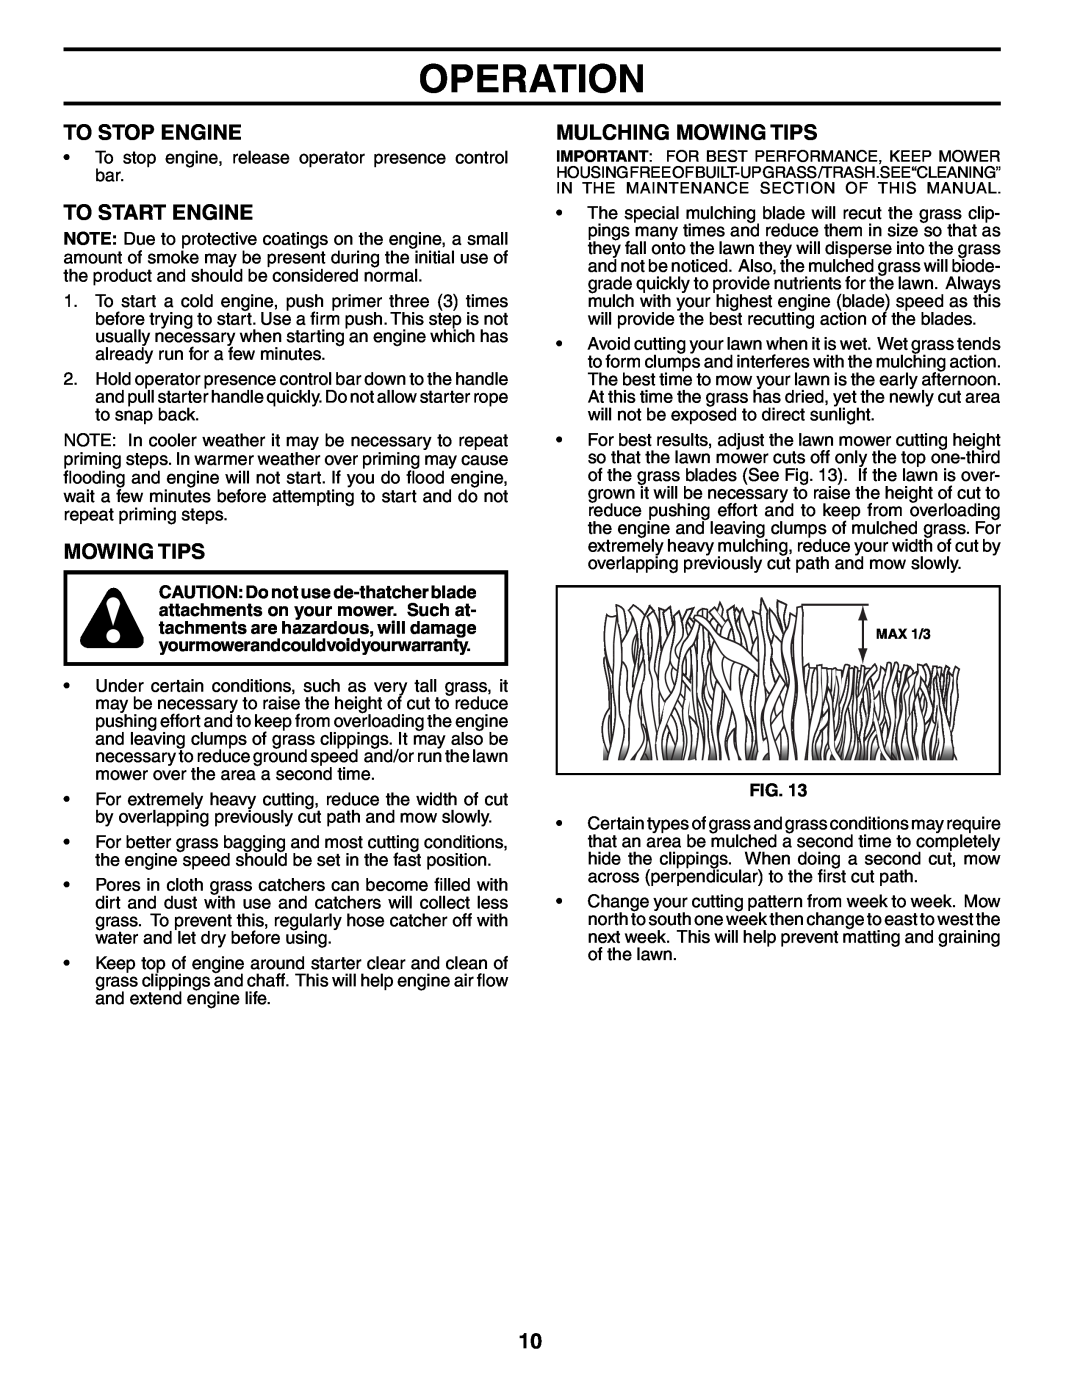 Husqvarna 917.37594 owner manual To Stop Engine, To Start Engine, Mulching Mowing Tips, Operation 